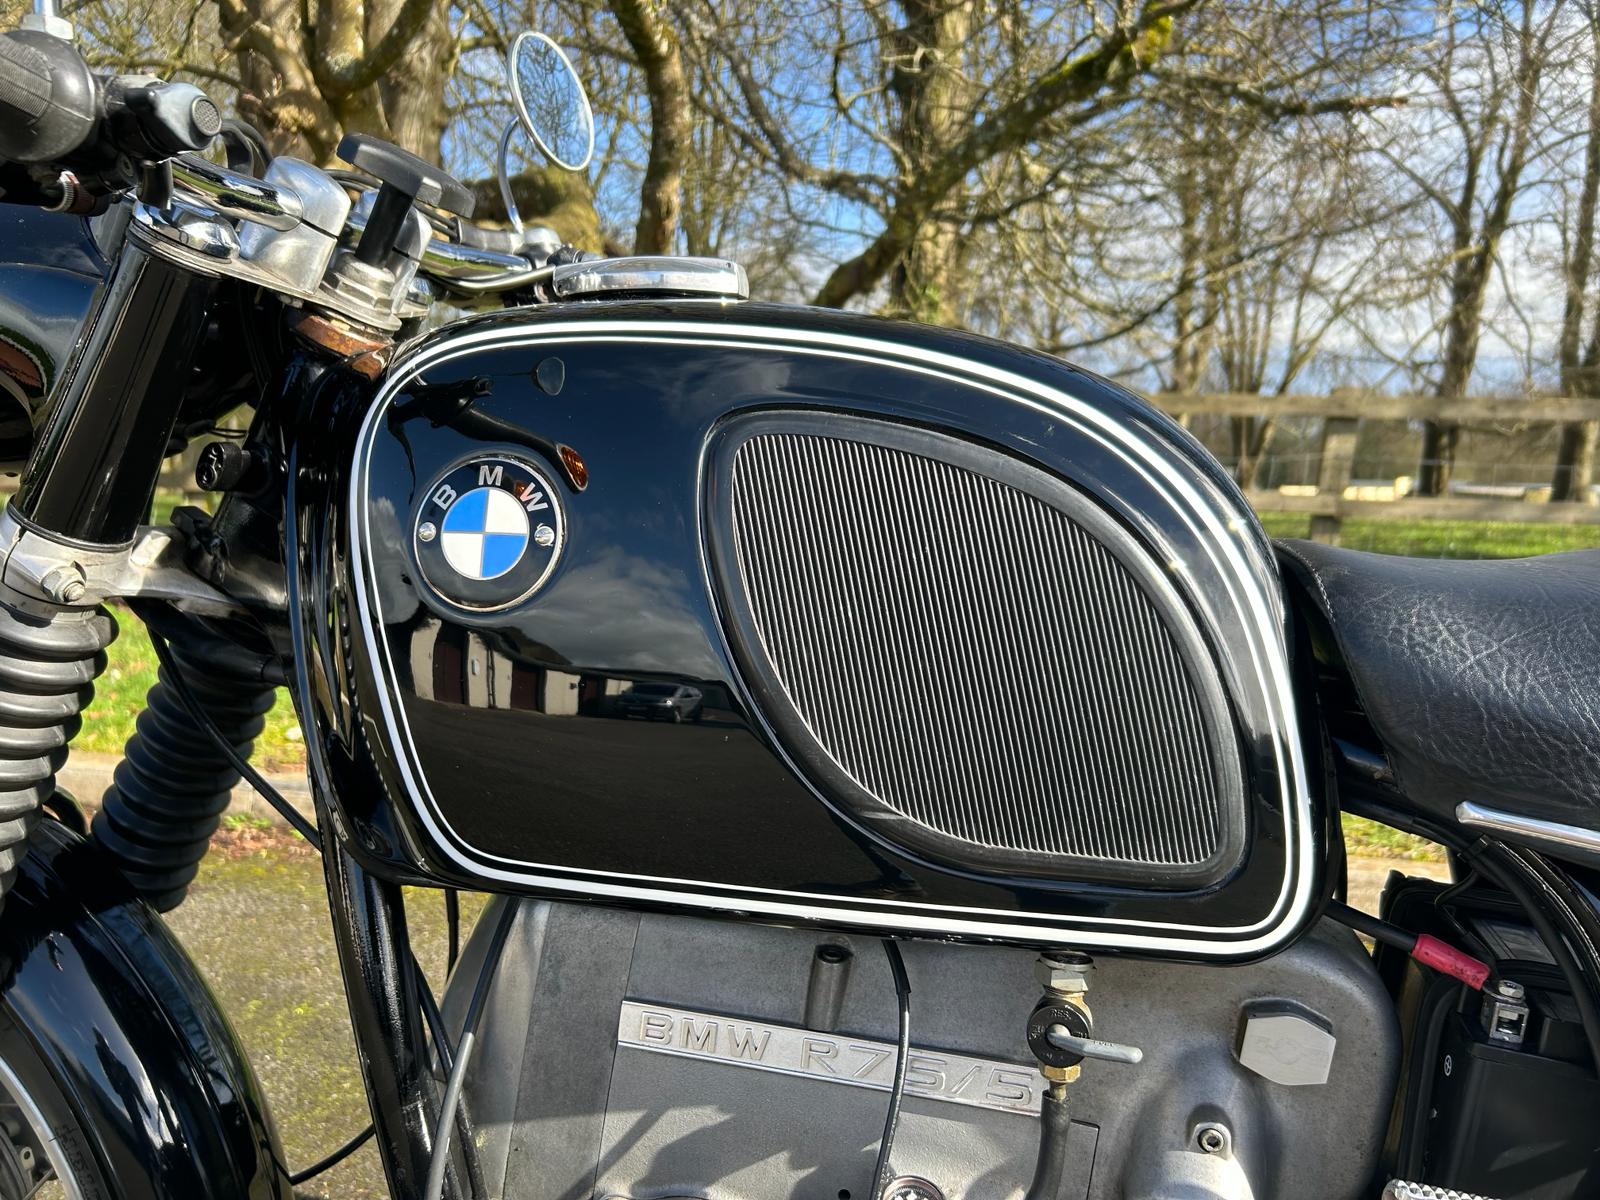 A BMW R75/5 MOTORCYCLE .1971. 72452 MILES. EXCELLENT WELL RESTORED CONDITION, V5, MOT AND TAX - Image 7 of 17